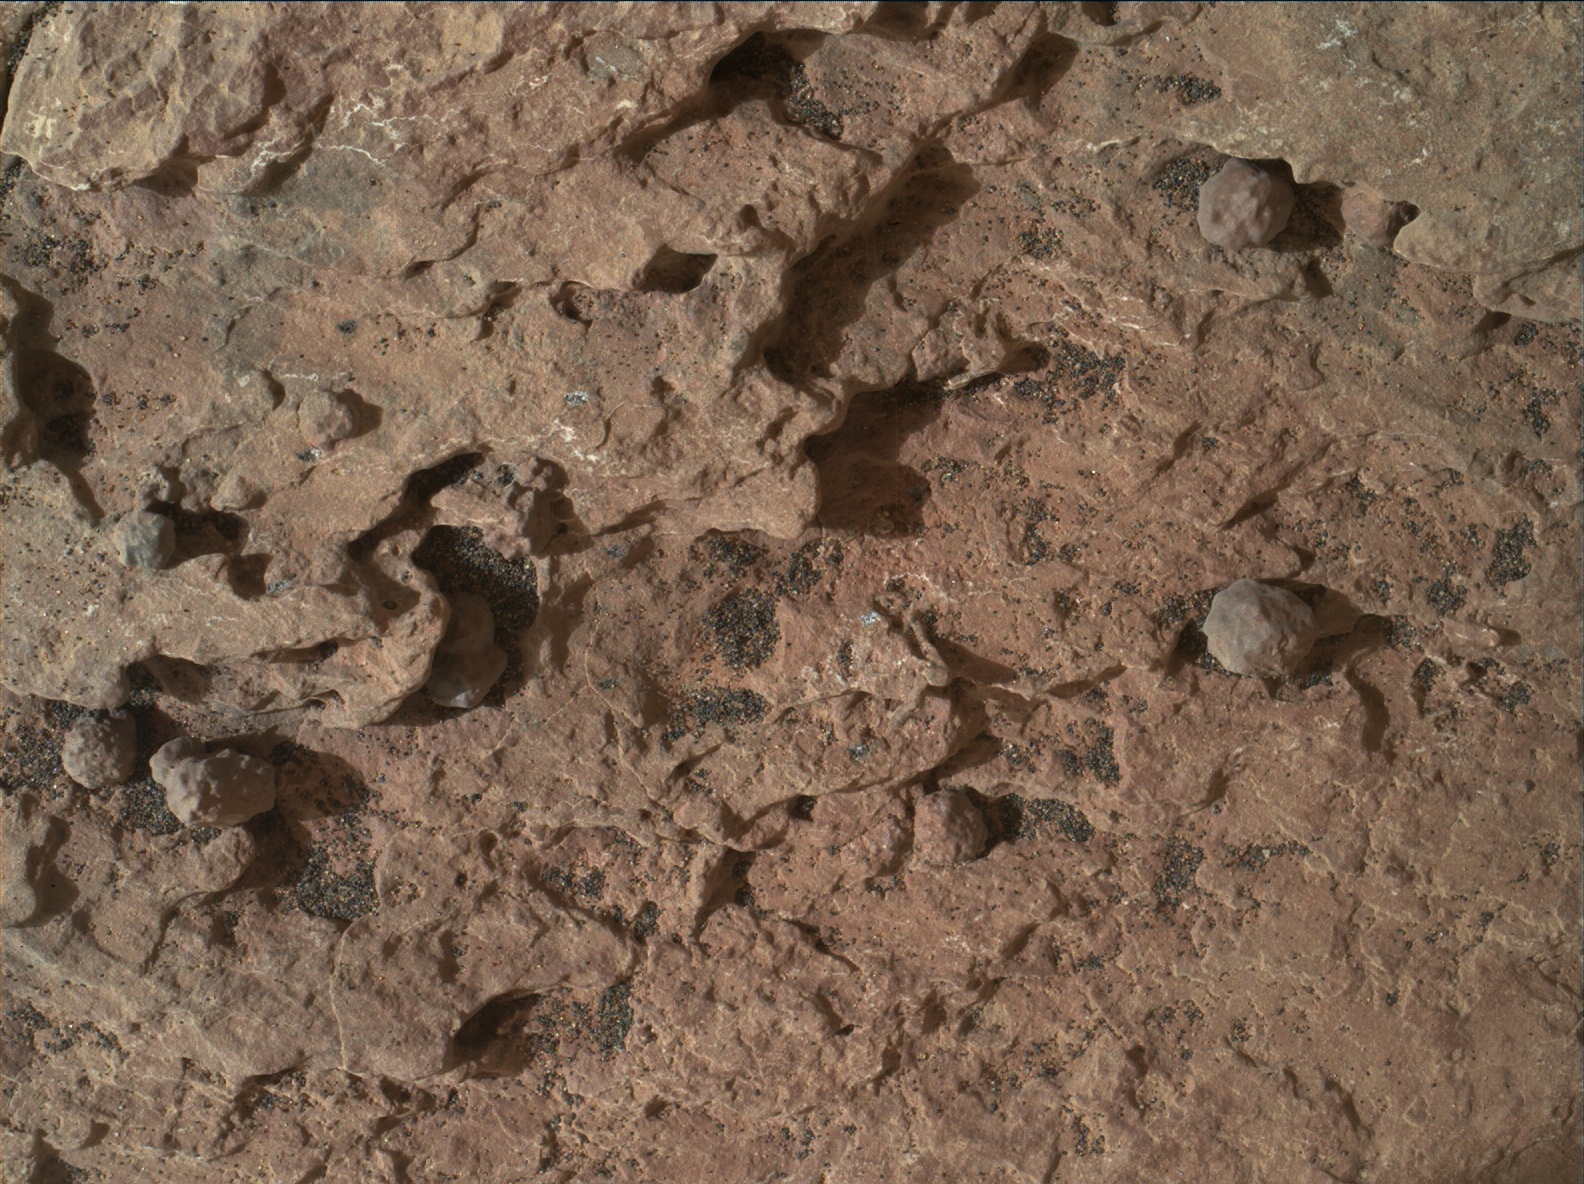 Nasa's Mars rover Curiosity acquired this image using its Mars Hand Lens Imager (MAHLI) on Sol 1615